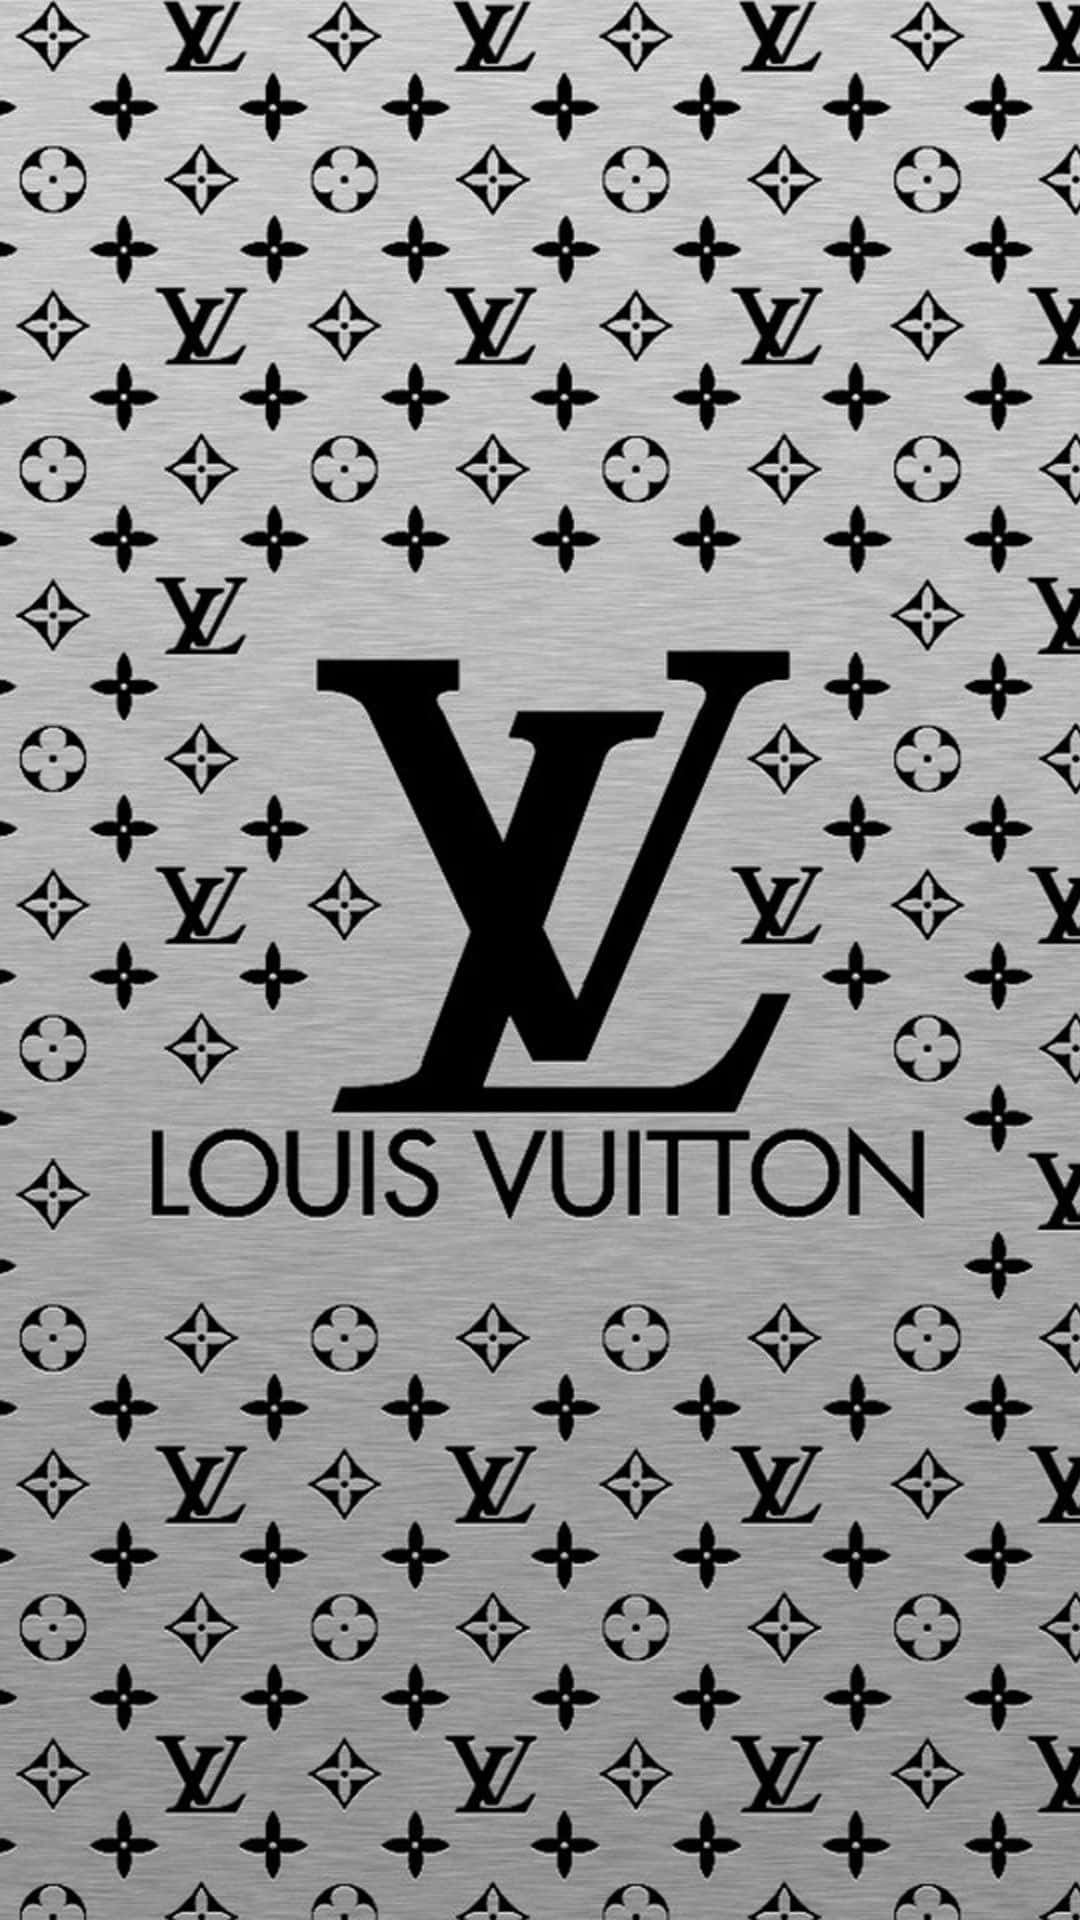 Download Louis Vuitton Logo On A Black And White Background Wallpaper